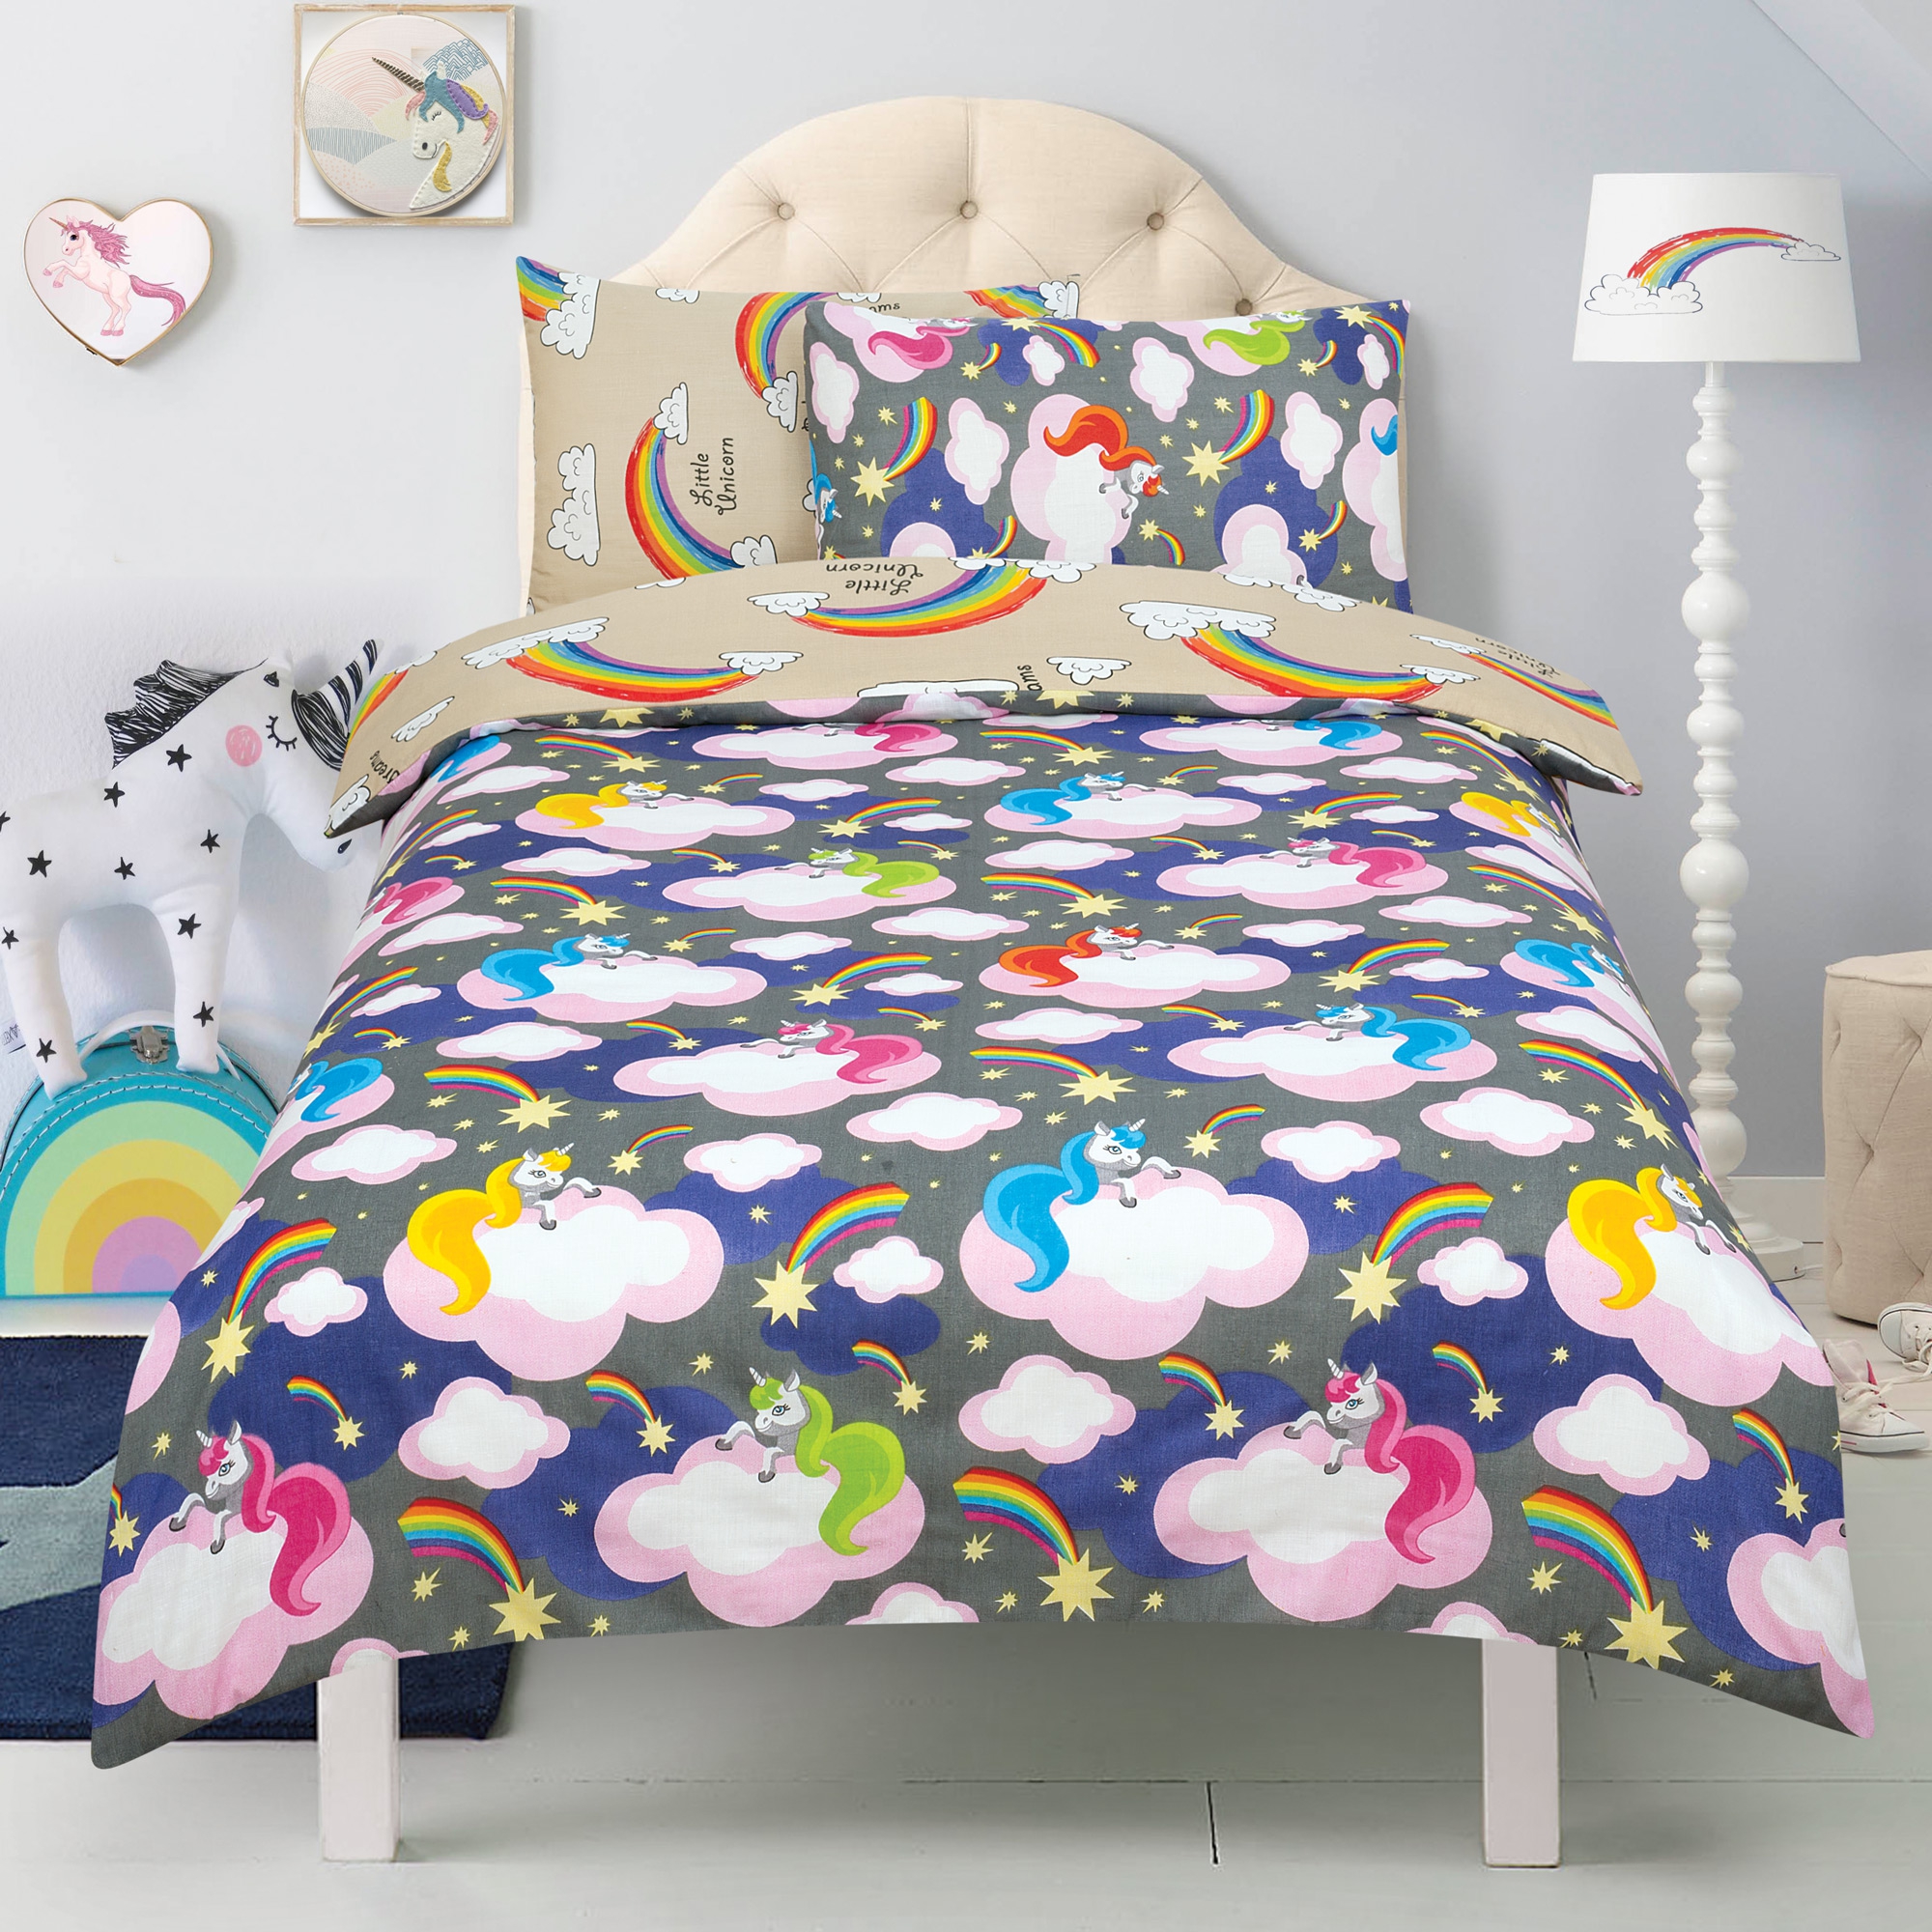 Unicorn 'Believe In Your Dreams' Charcoal Reversible Rotary Single Bed Duvet Quilt Cover Set